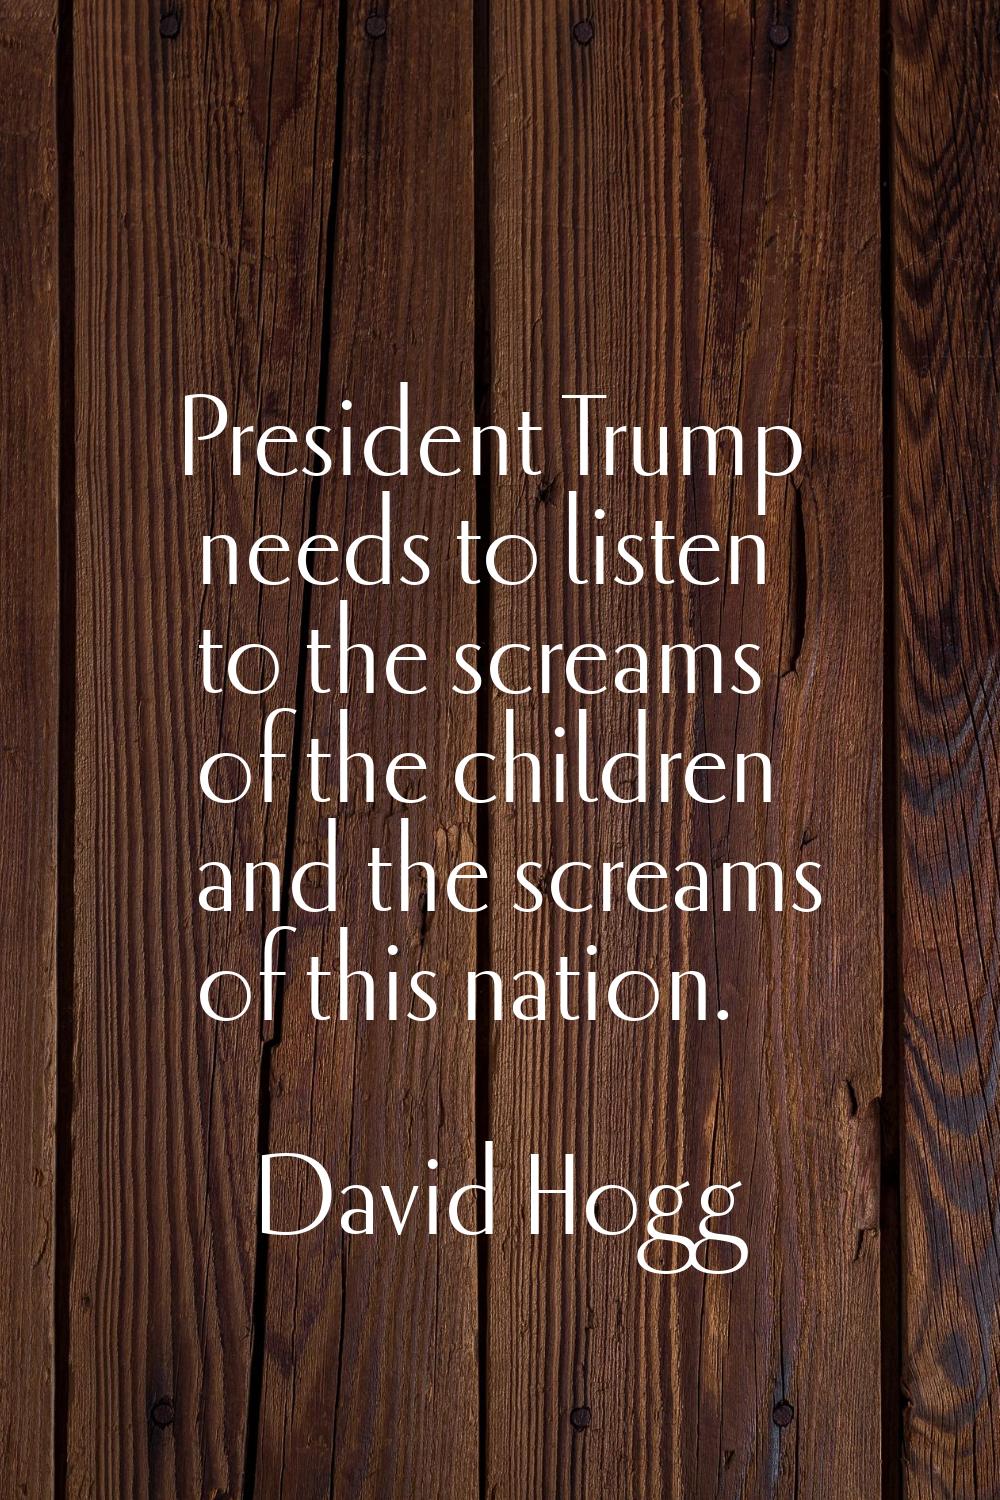 President Trump needs to listen to the screams of the children and the screams of this nation.